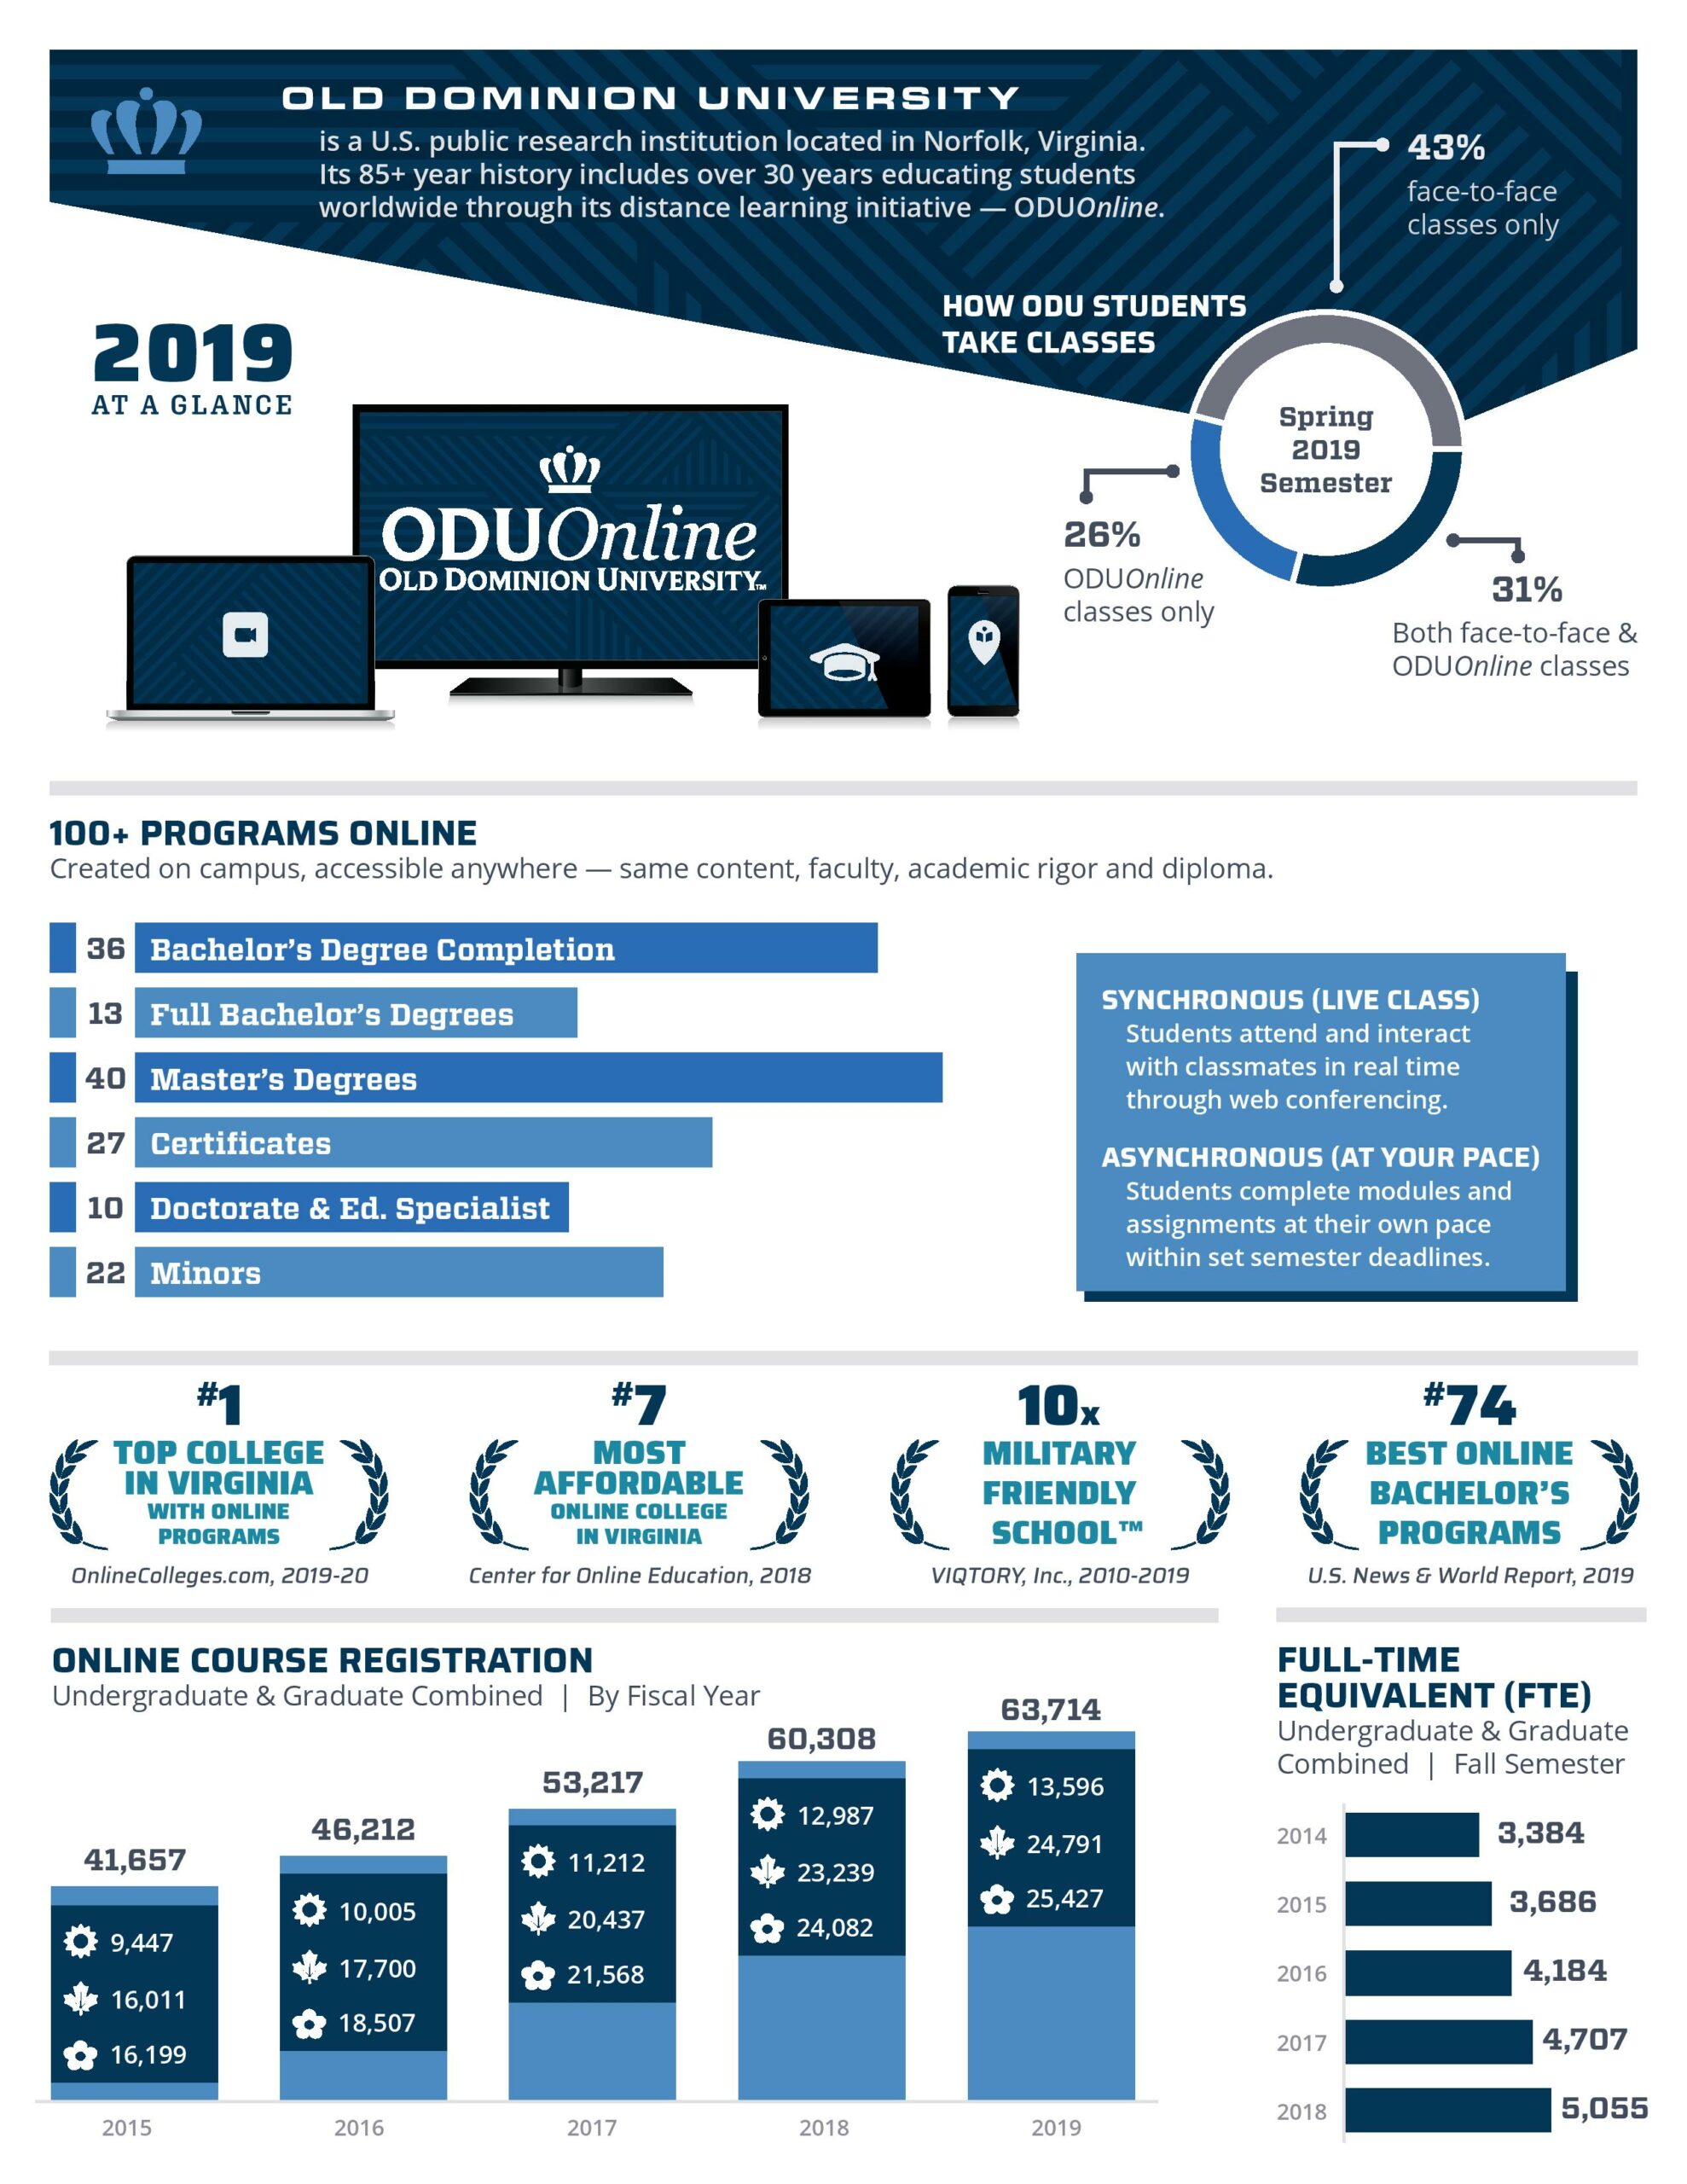 Of Old Dominion University’s 24,000 students, 27% take all their courses online while another 30% take at least one class virtually. (Click to enlarge infographic)